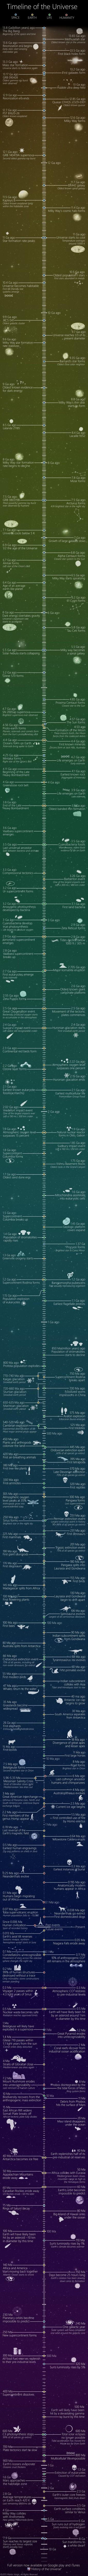 Timeline Of The Universe